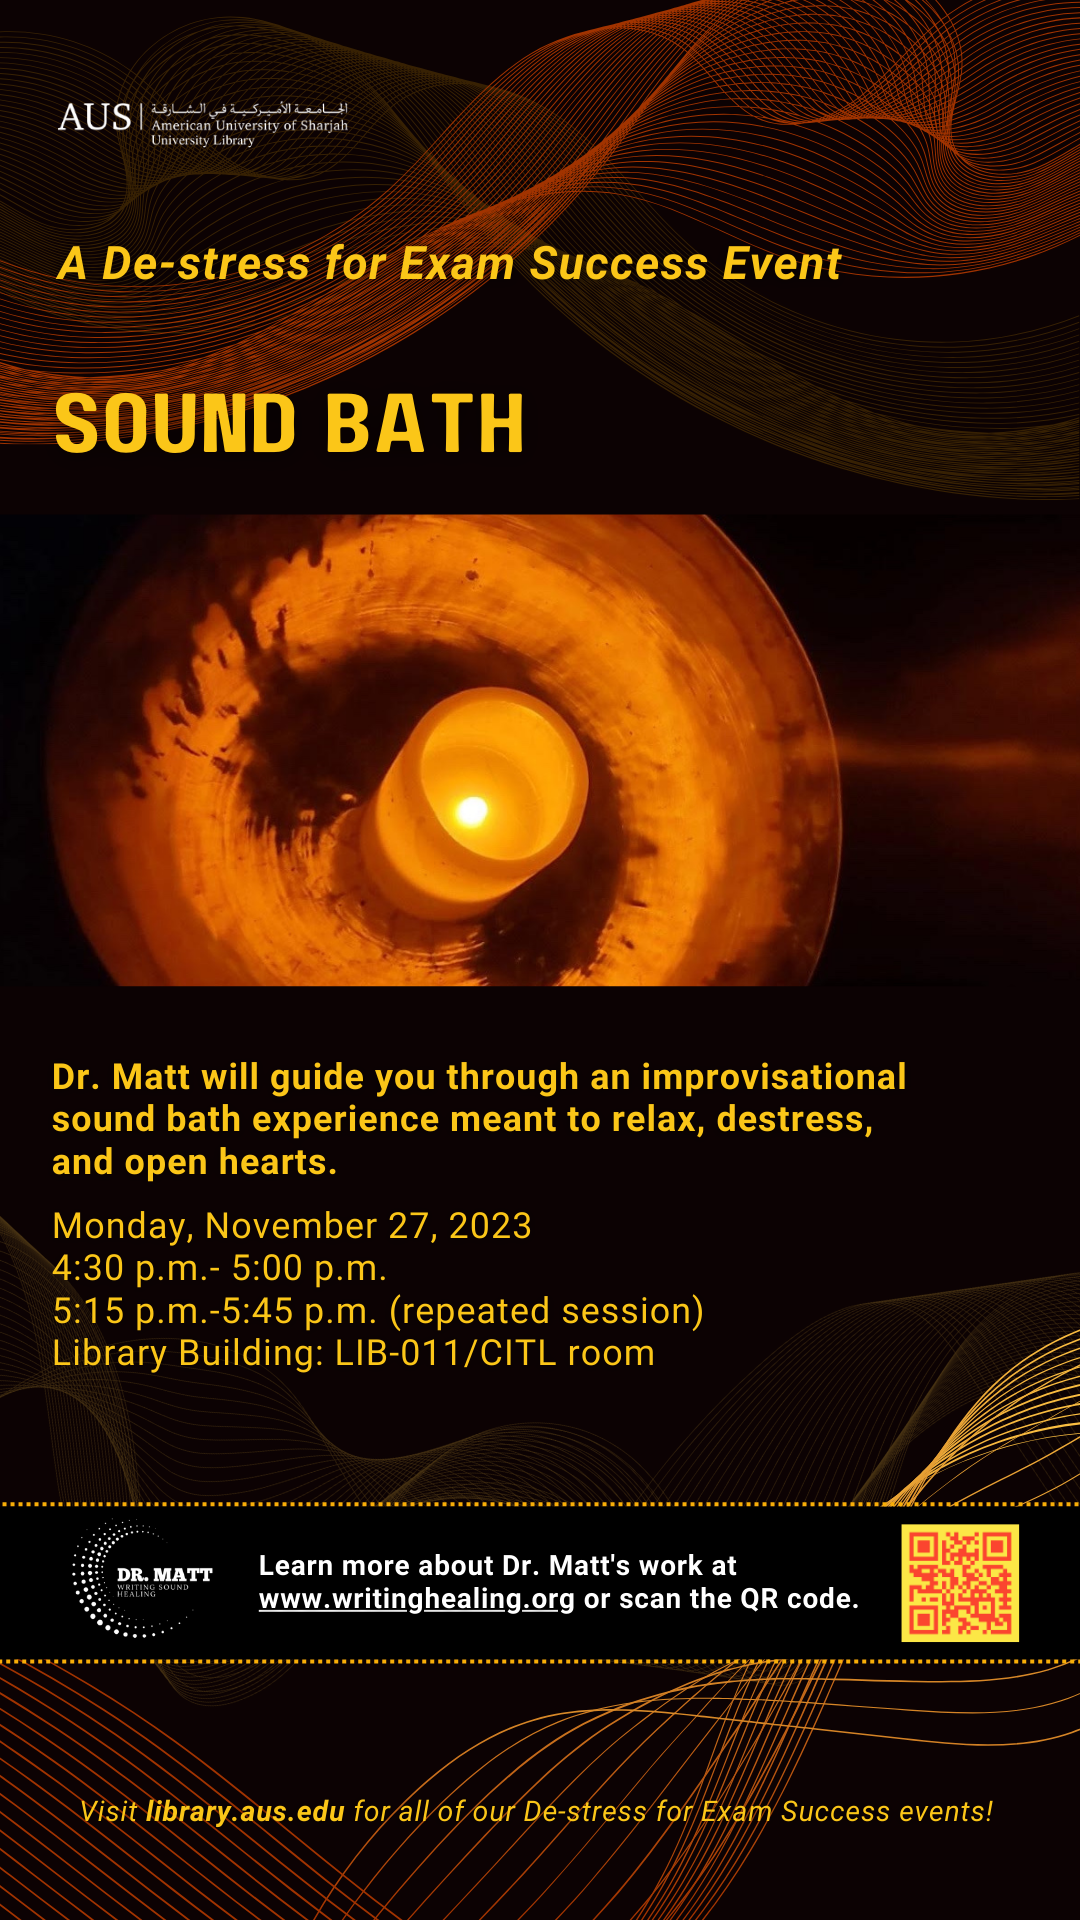 Sound Bath Experience Poster